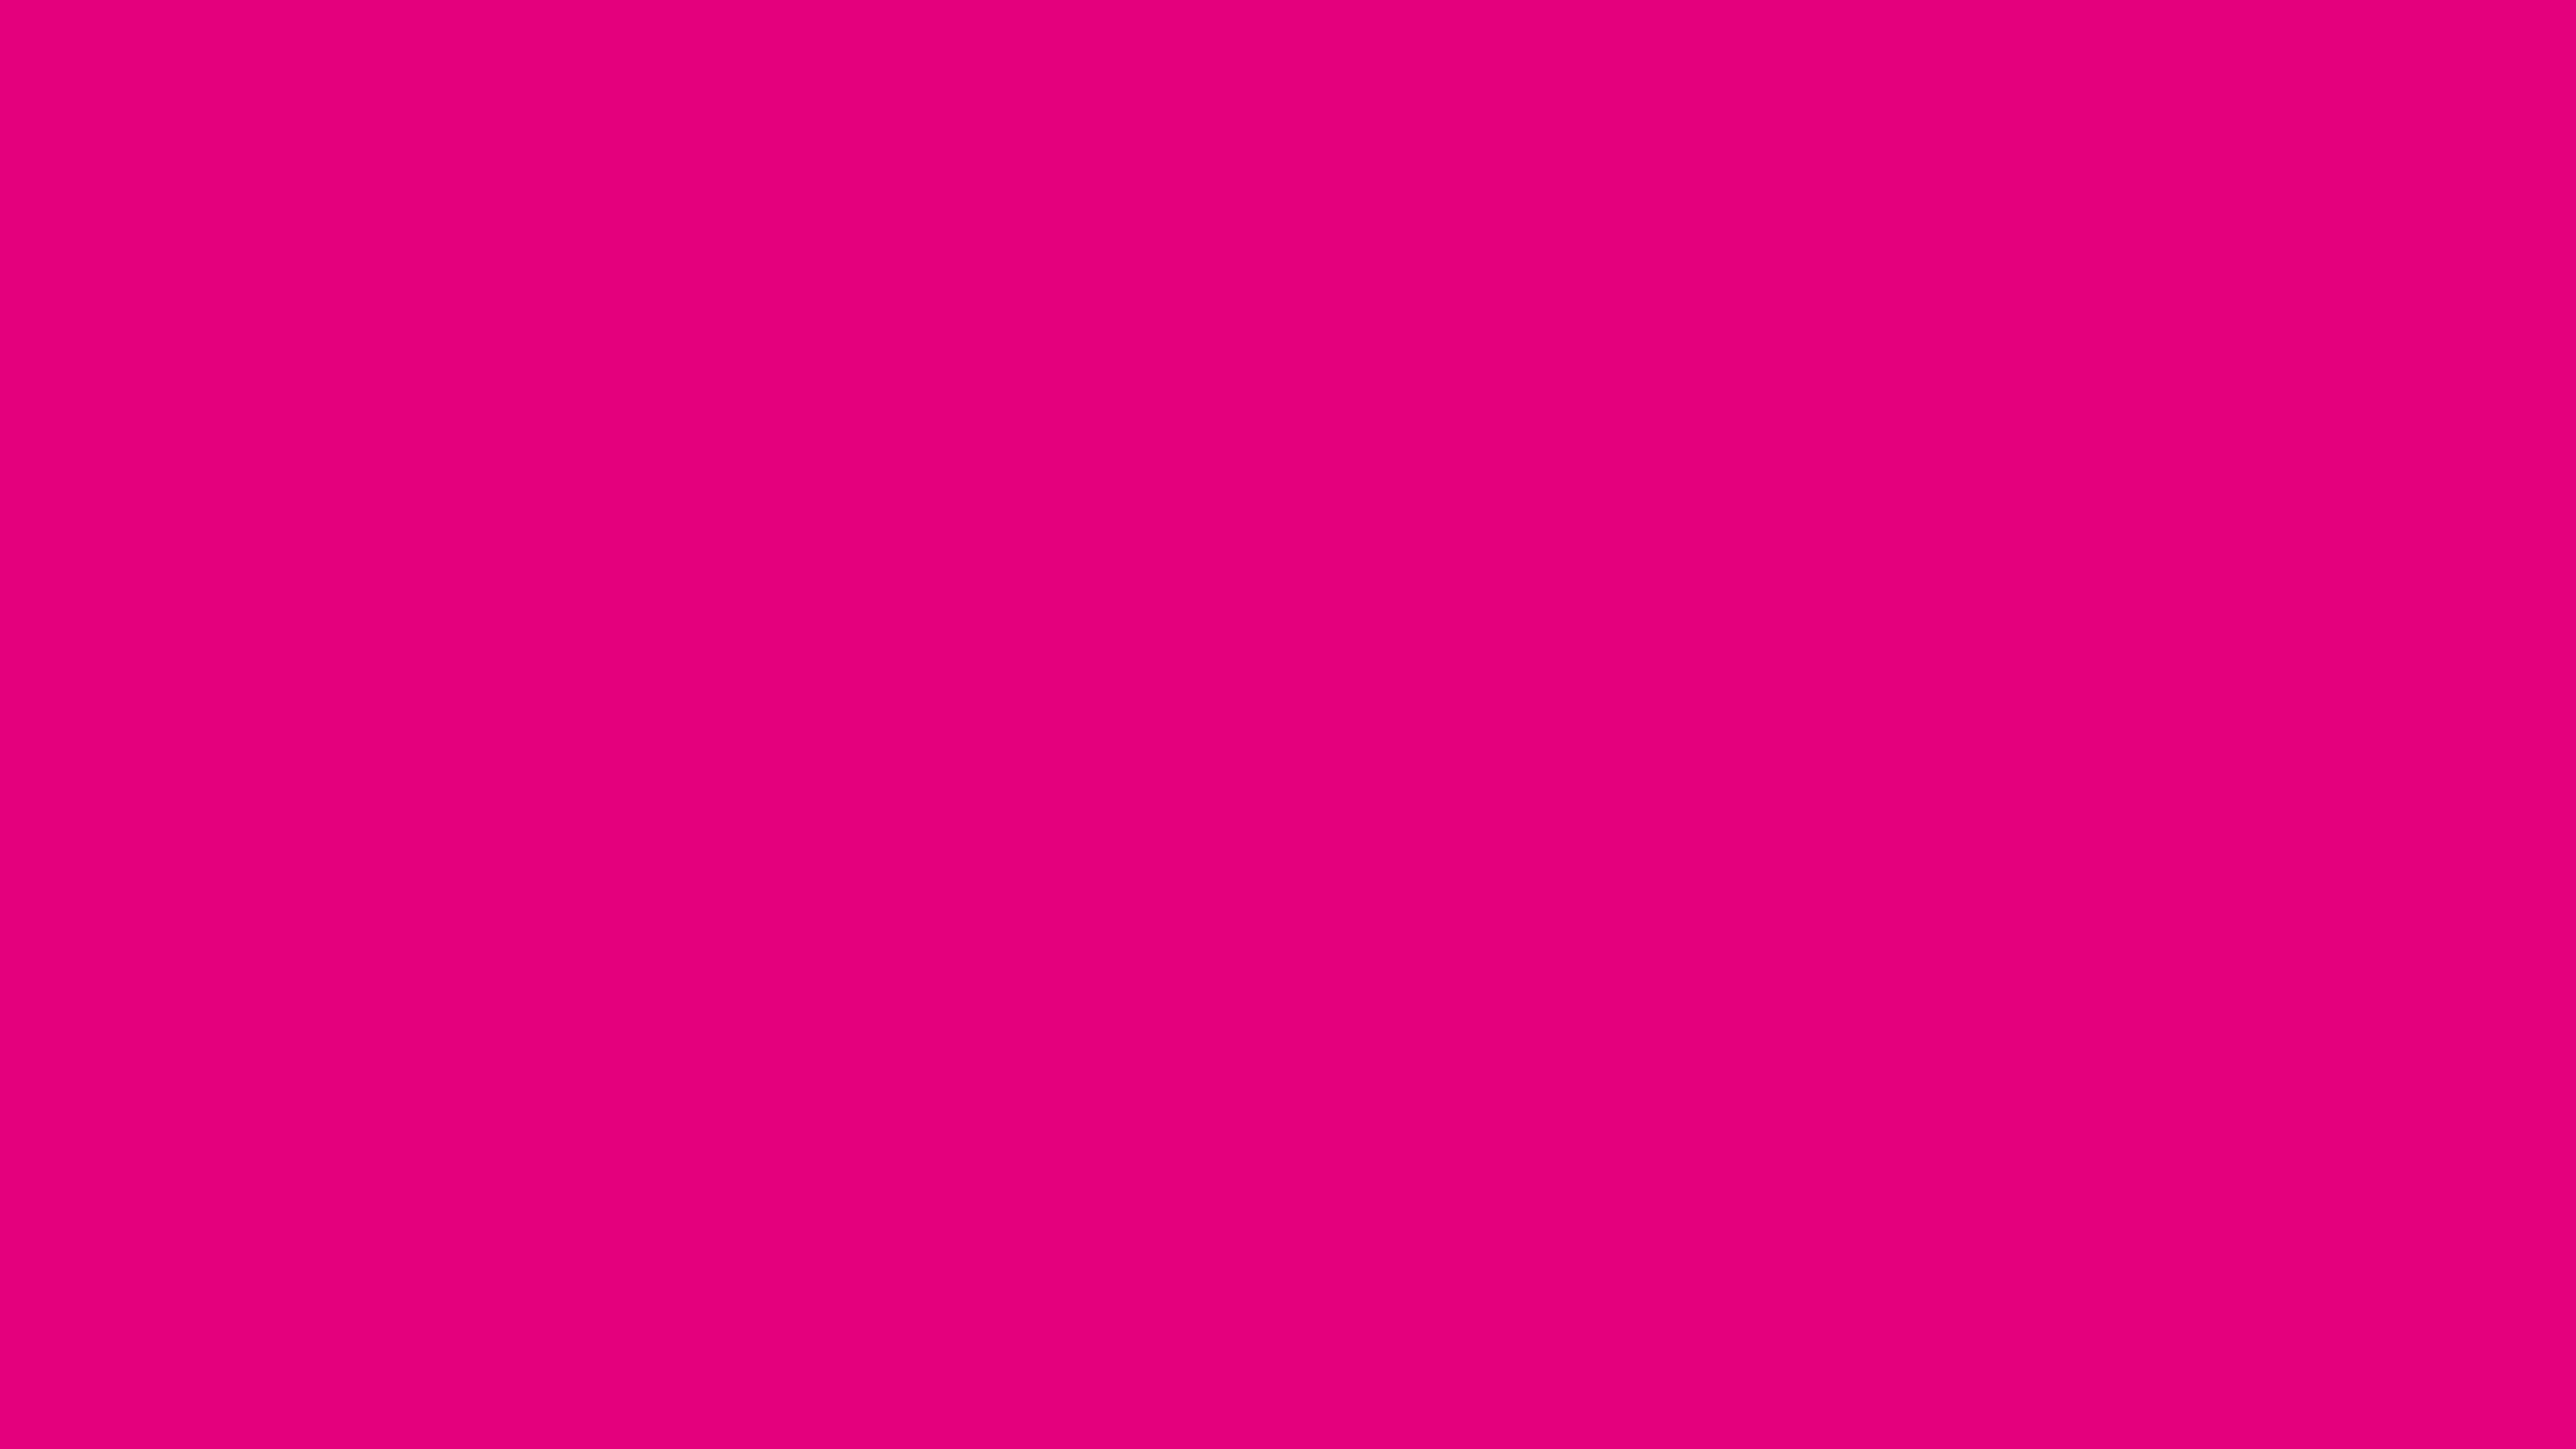 7680x4320 Mexican Pink Solid Color Background